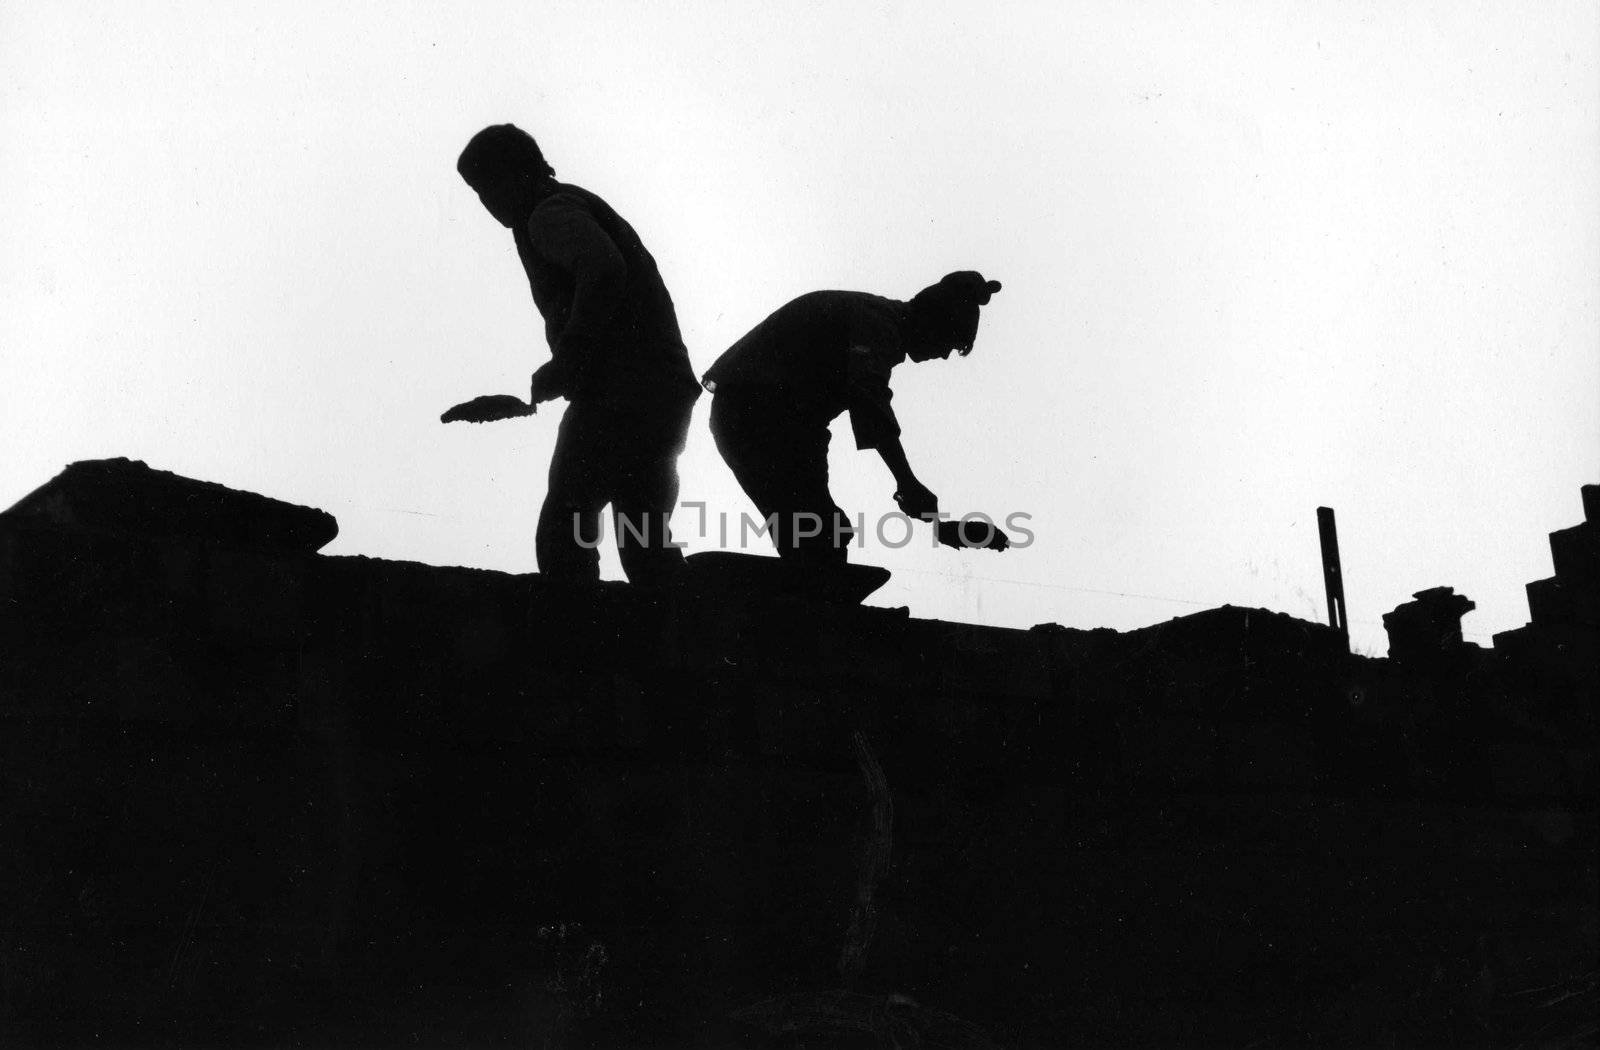 two masons silhouetted as they work on the roof of a building